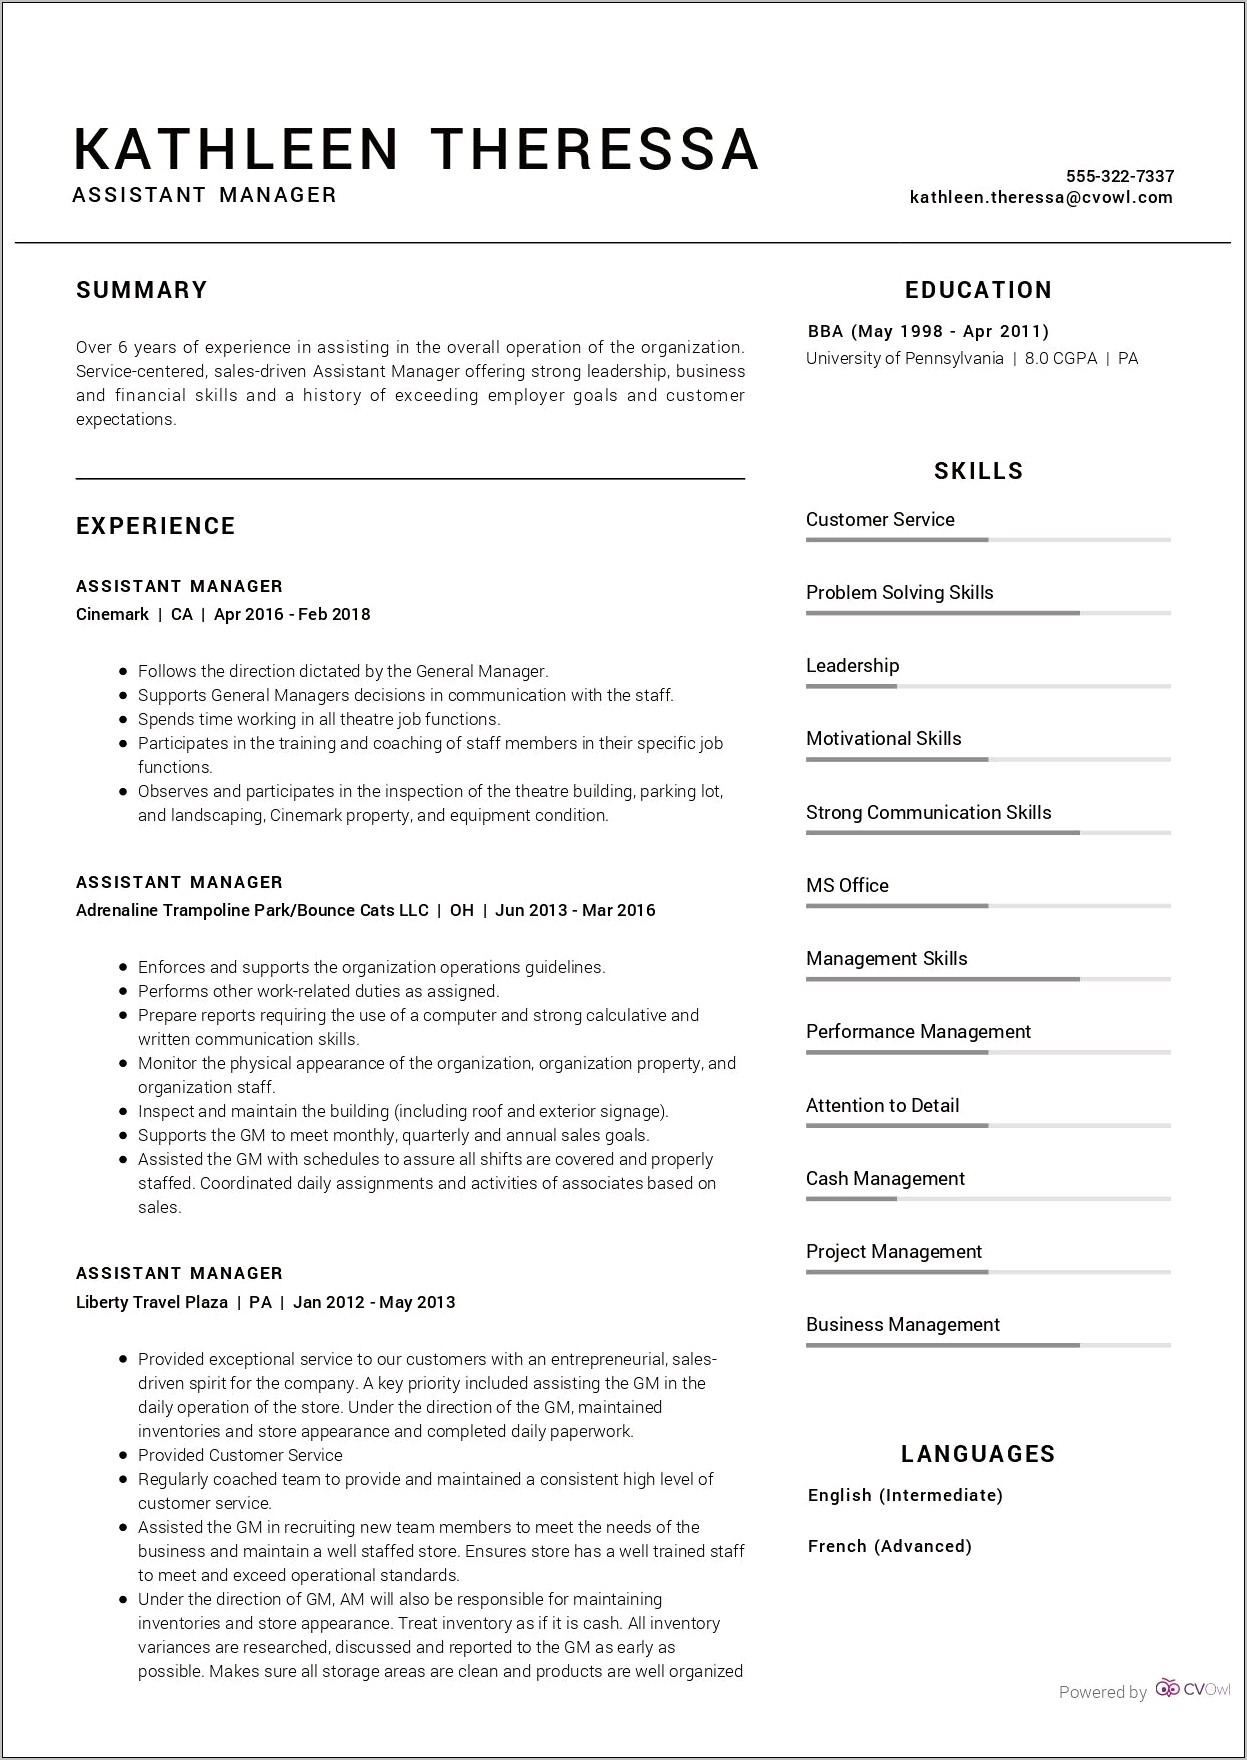 Duties Of An Assistant Manager Resume